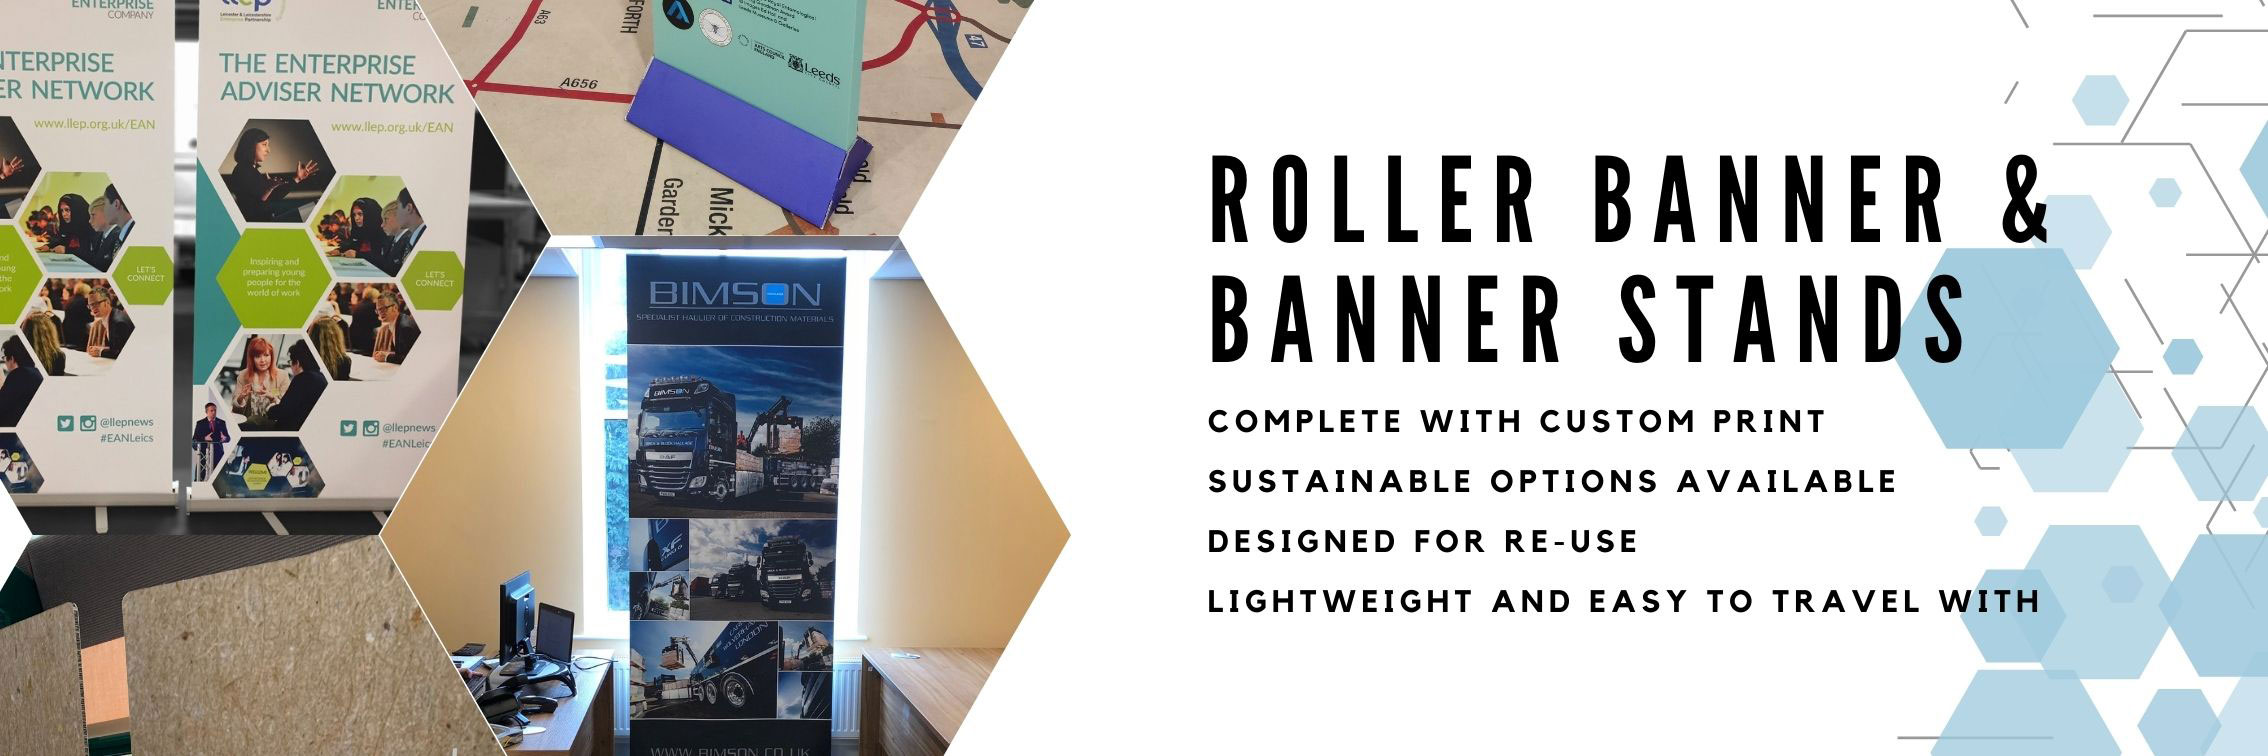 Roller banner and banner stands